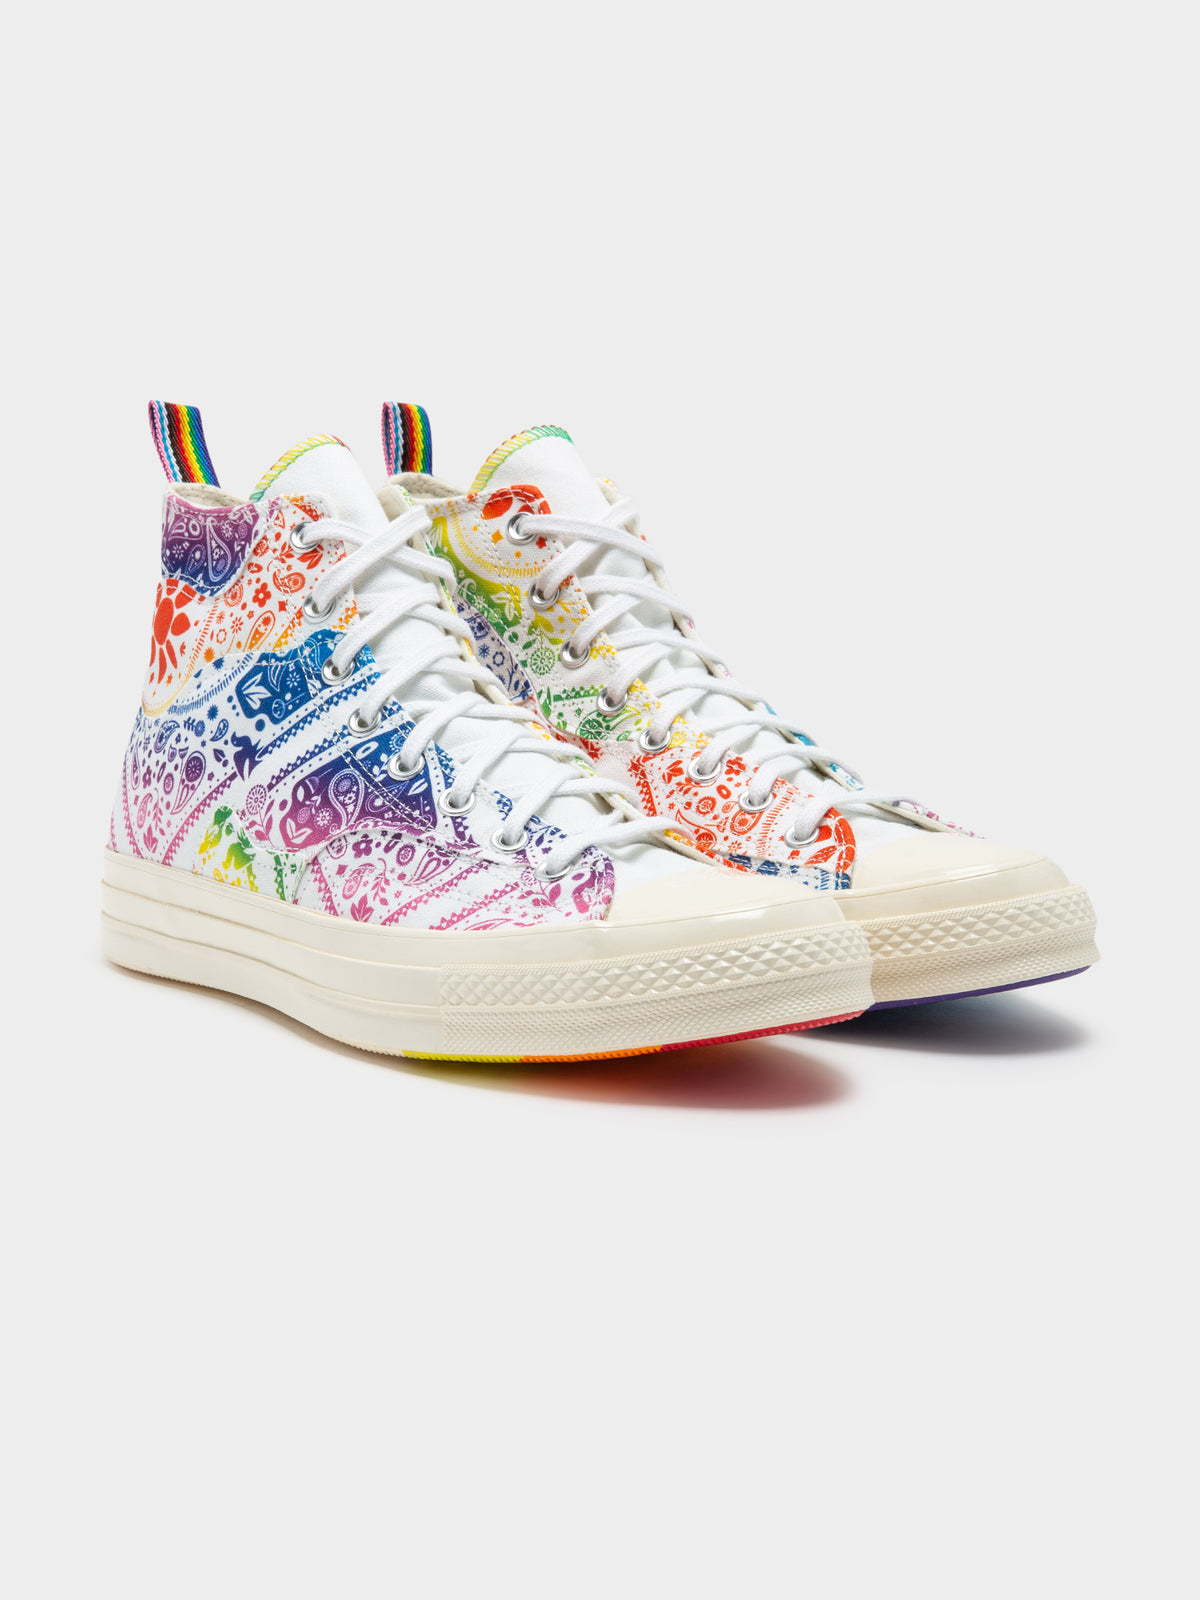 Unisex Chuck 70 Pride High-Top Sneakers in White &amp; Rainbow Paisley